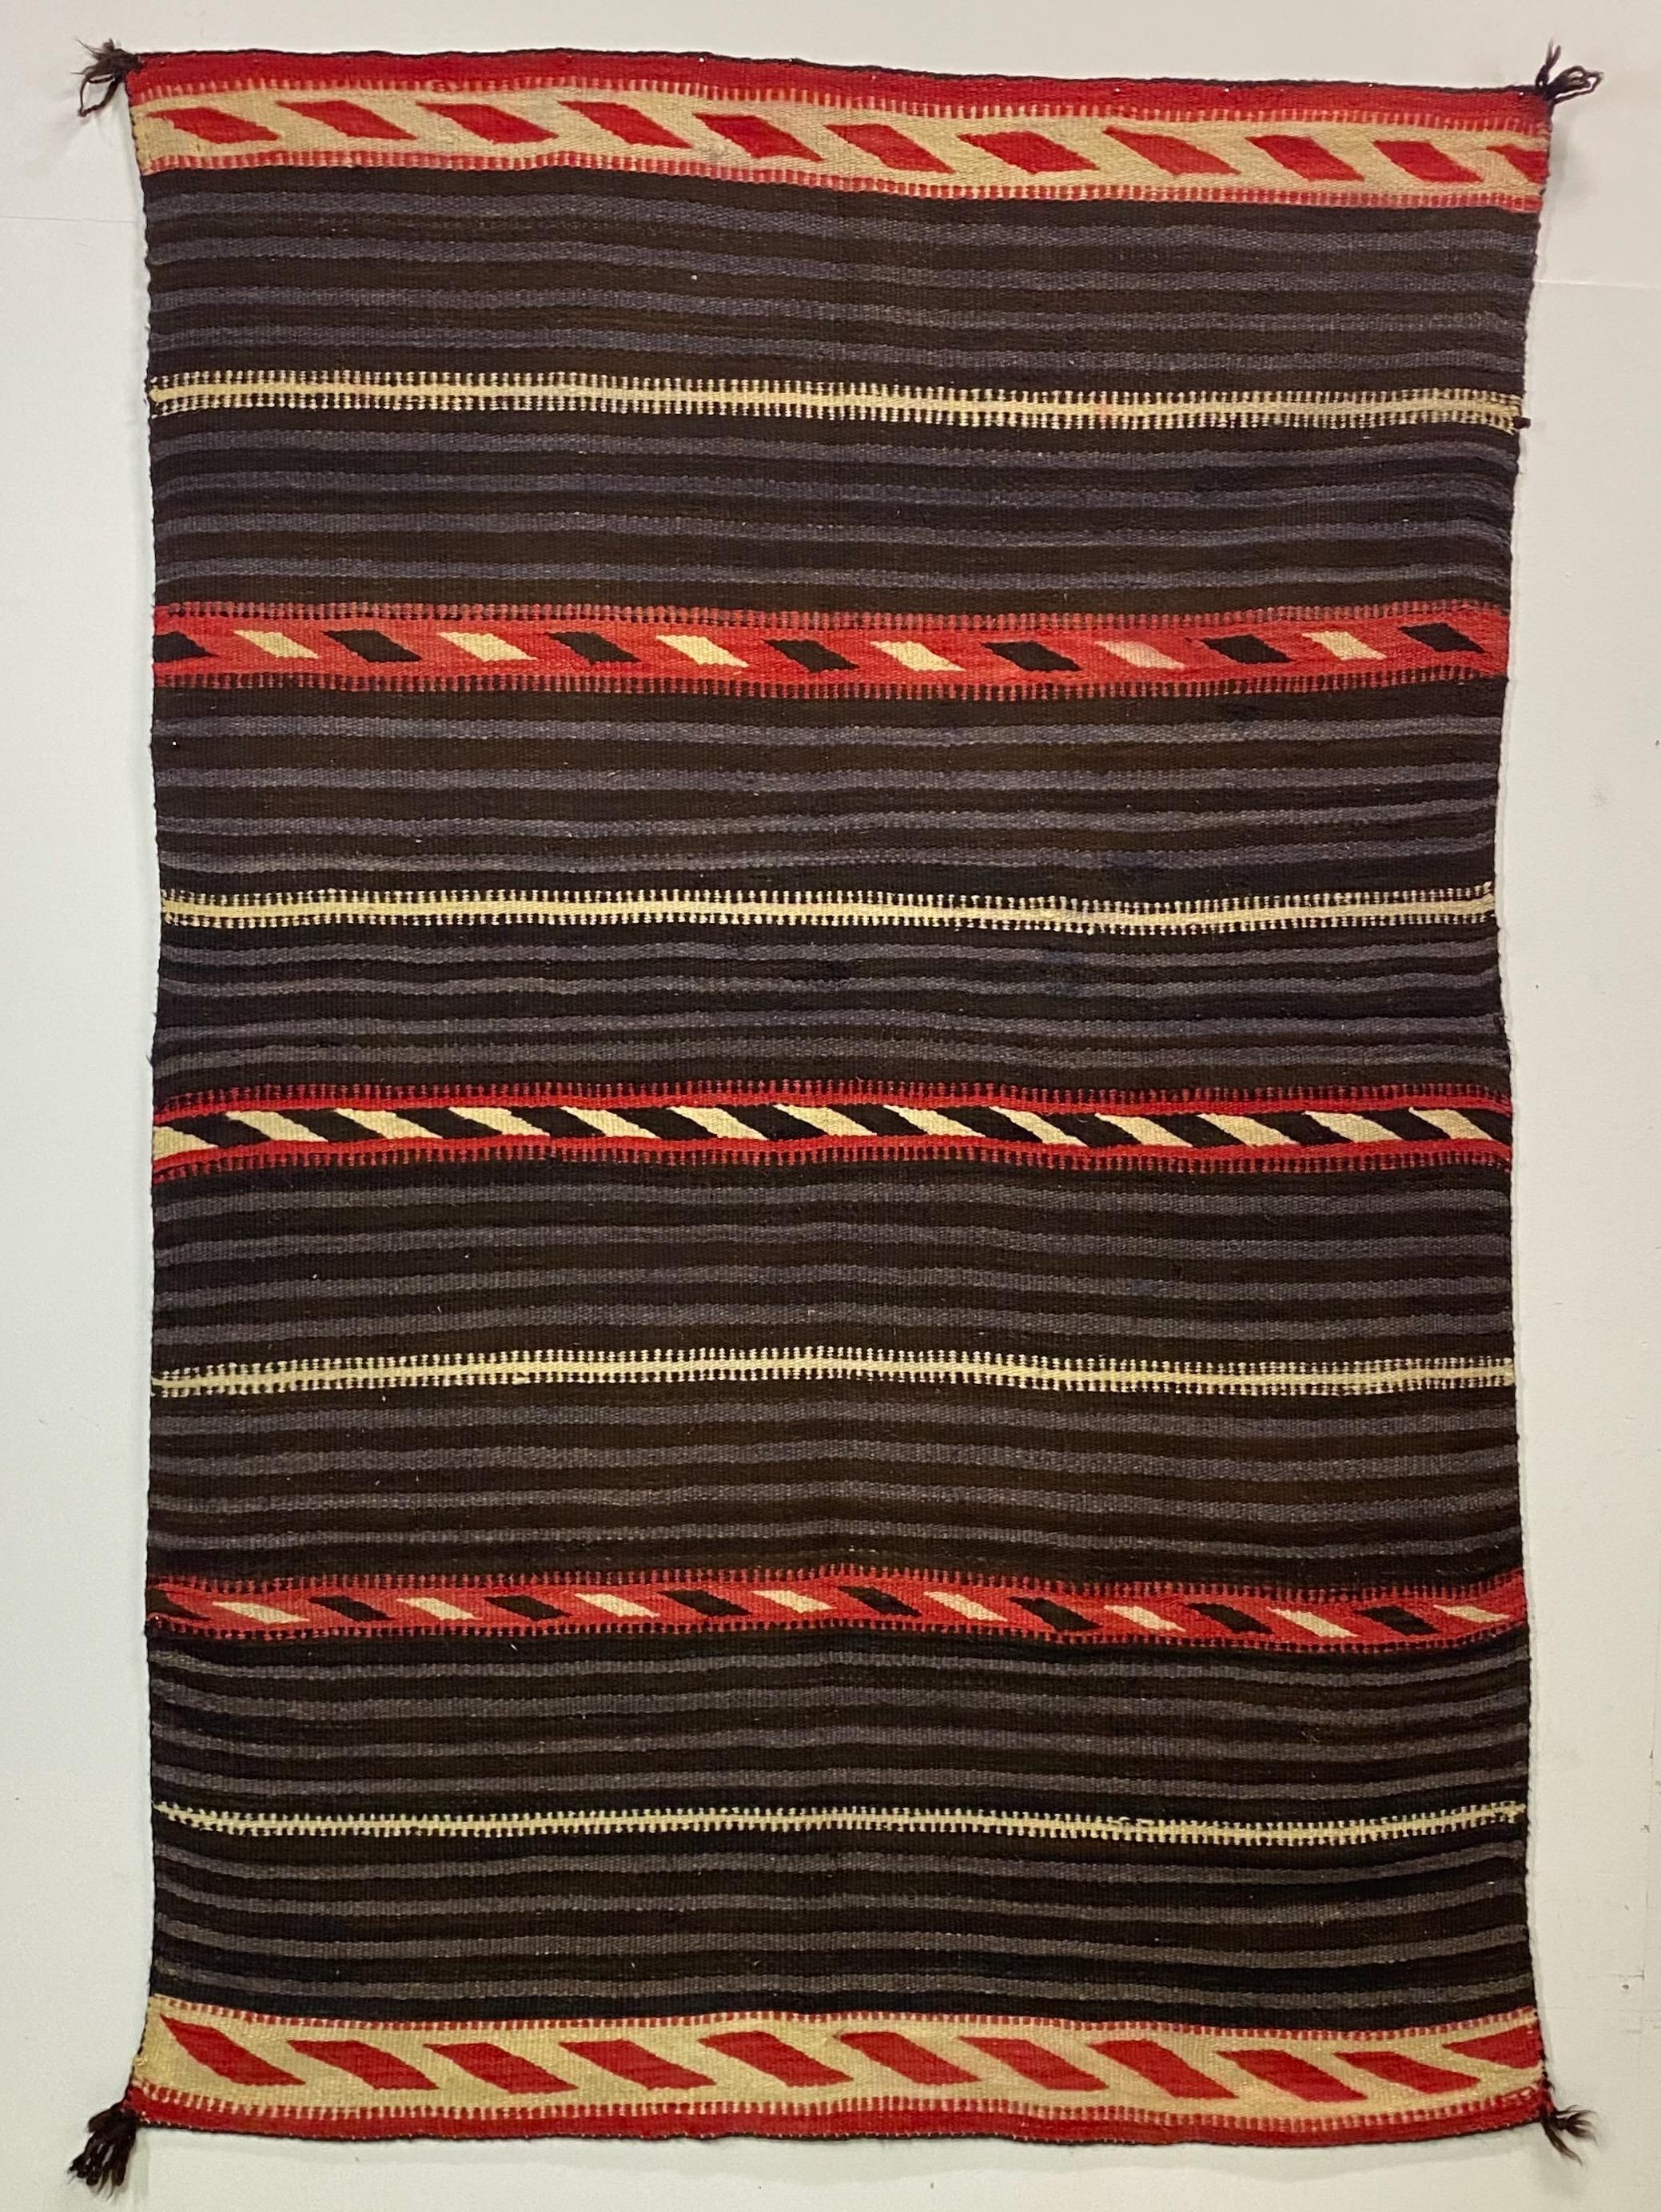 Late 19th century classic Moki style Navajo wearing blanket.
The Moki pattern is one of the oldest designs in Navajo weaving and can be traced archaeologically to circa 1750.
Recently cleaned, shows some minor light fading and old repairs (please